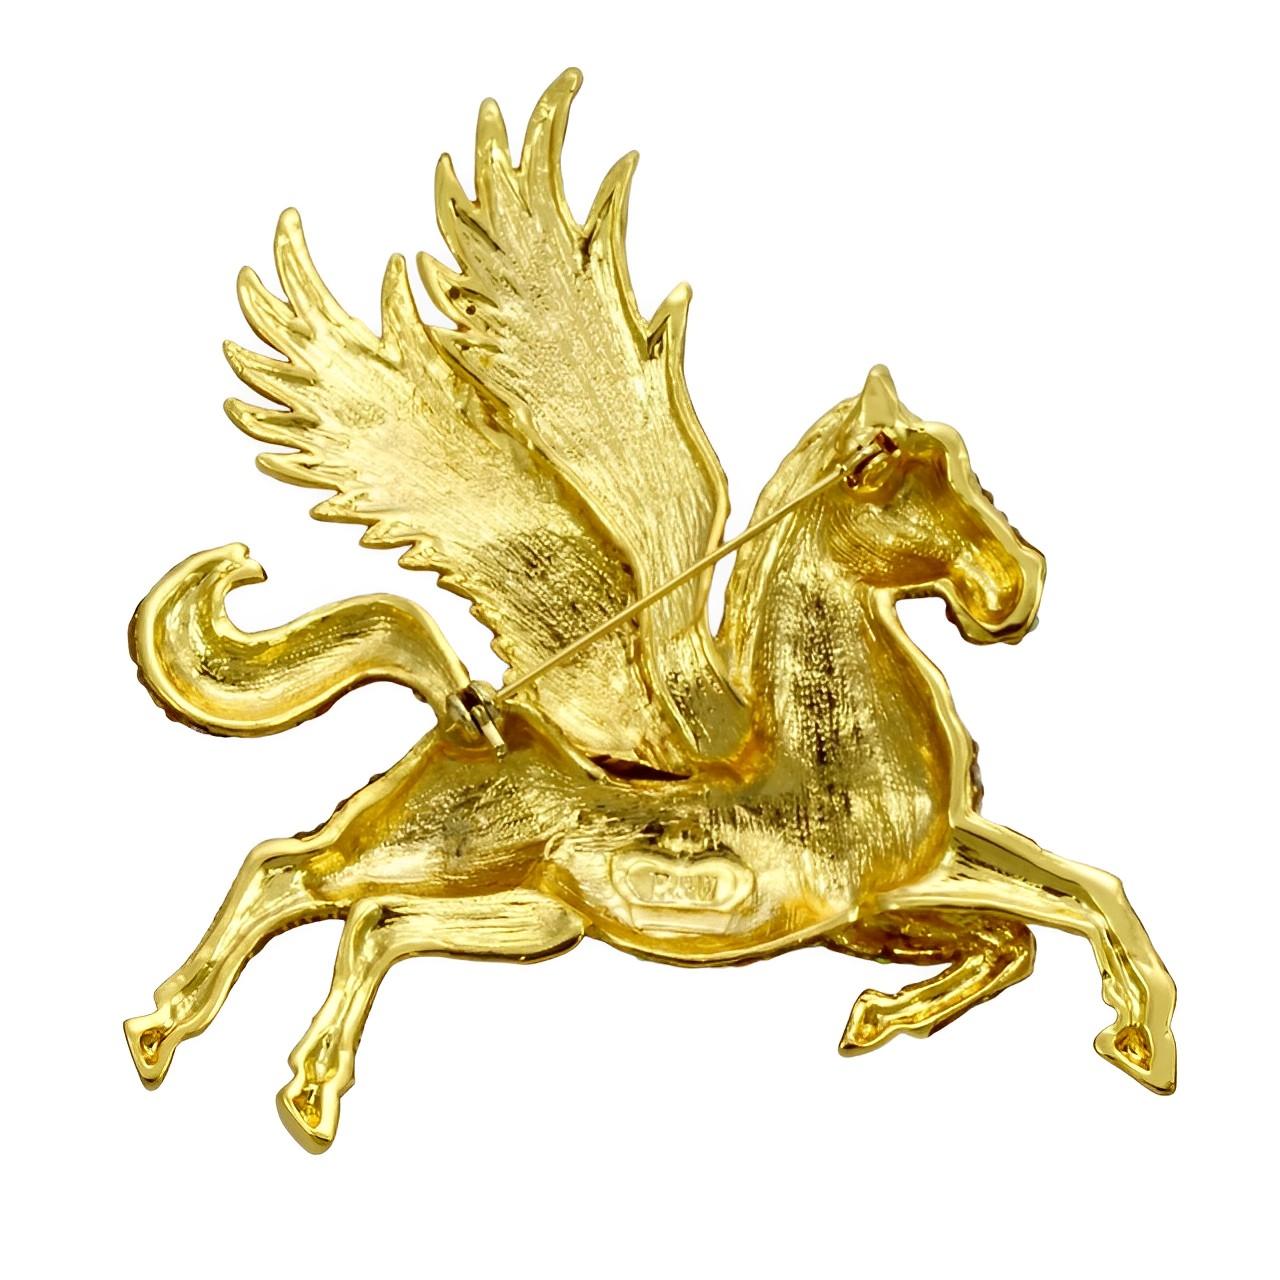 
Fabulous Butler & Wilson gold plated fantasy Pegasus brooch encrusted with gold aurora borealis crystals. It has a green crystal eye. Measuring maximum width 7.3 cm / 2.8 inches by maximum length 8 cm / 3.1 inches. The brooch is in very good